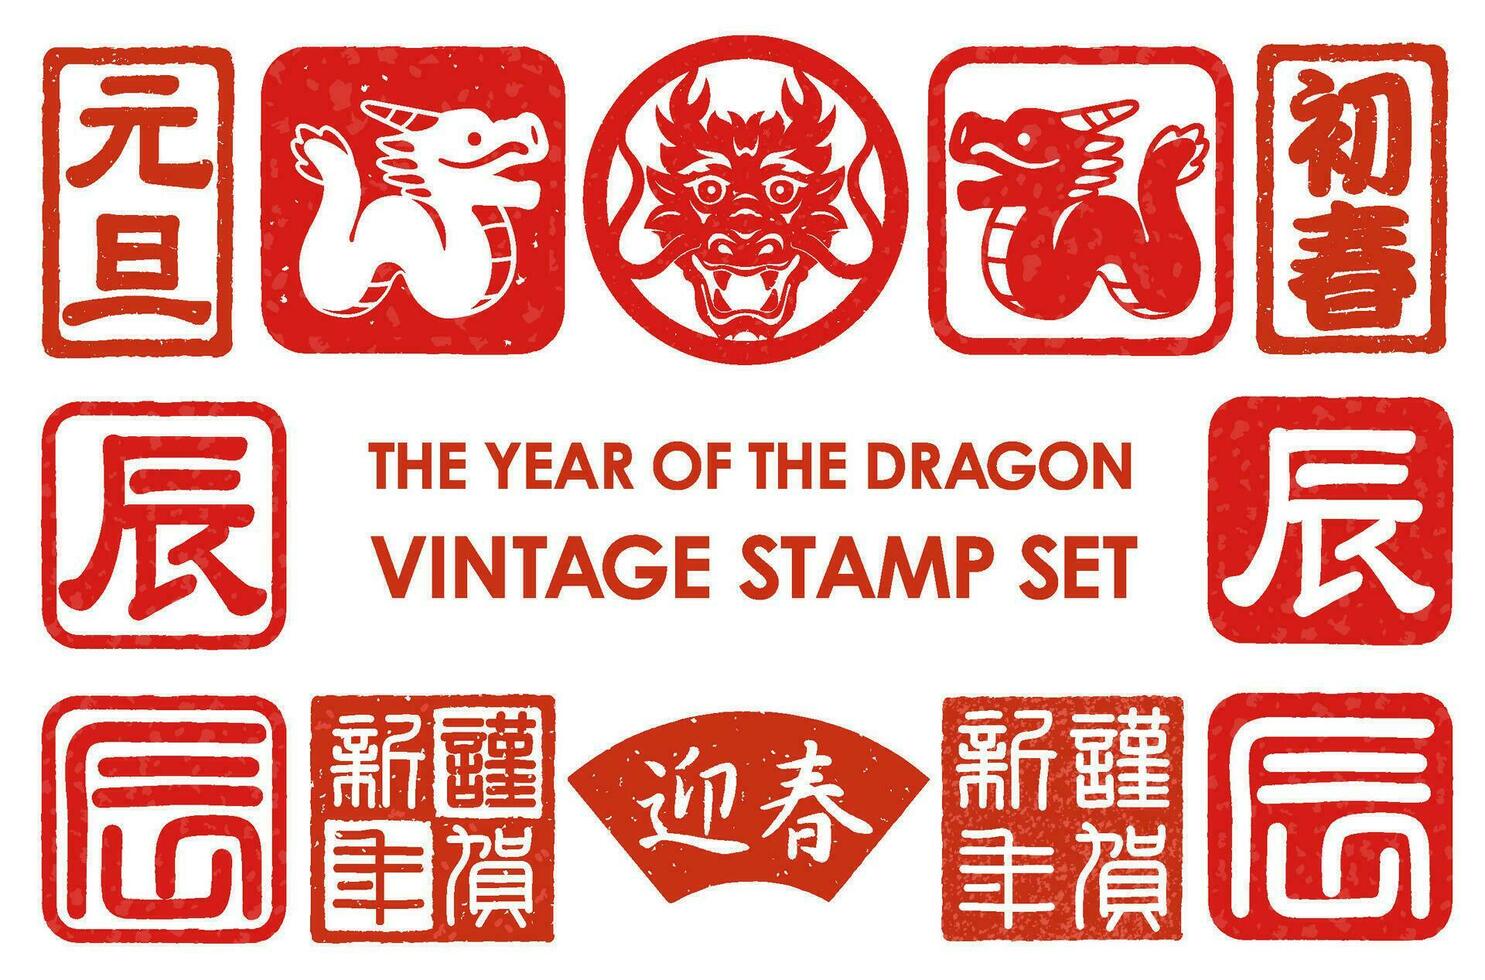 The Year Of The Dragon Japanese New Years Greeting Stamp Set. Kanji Text Translation - Happy New Year. New Year. New Years Day. The Dragon. vector